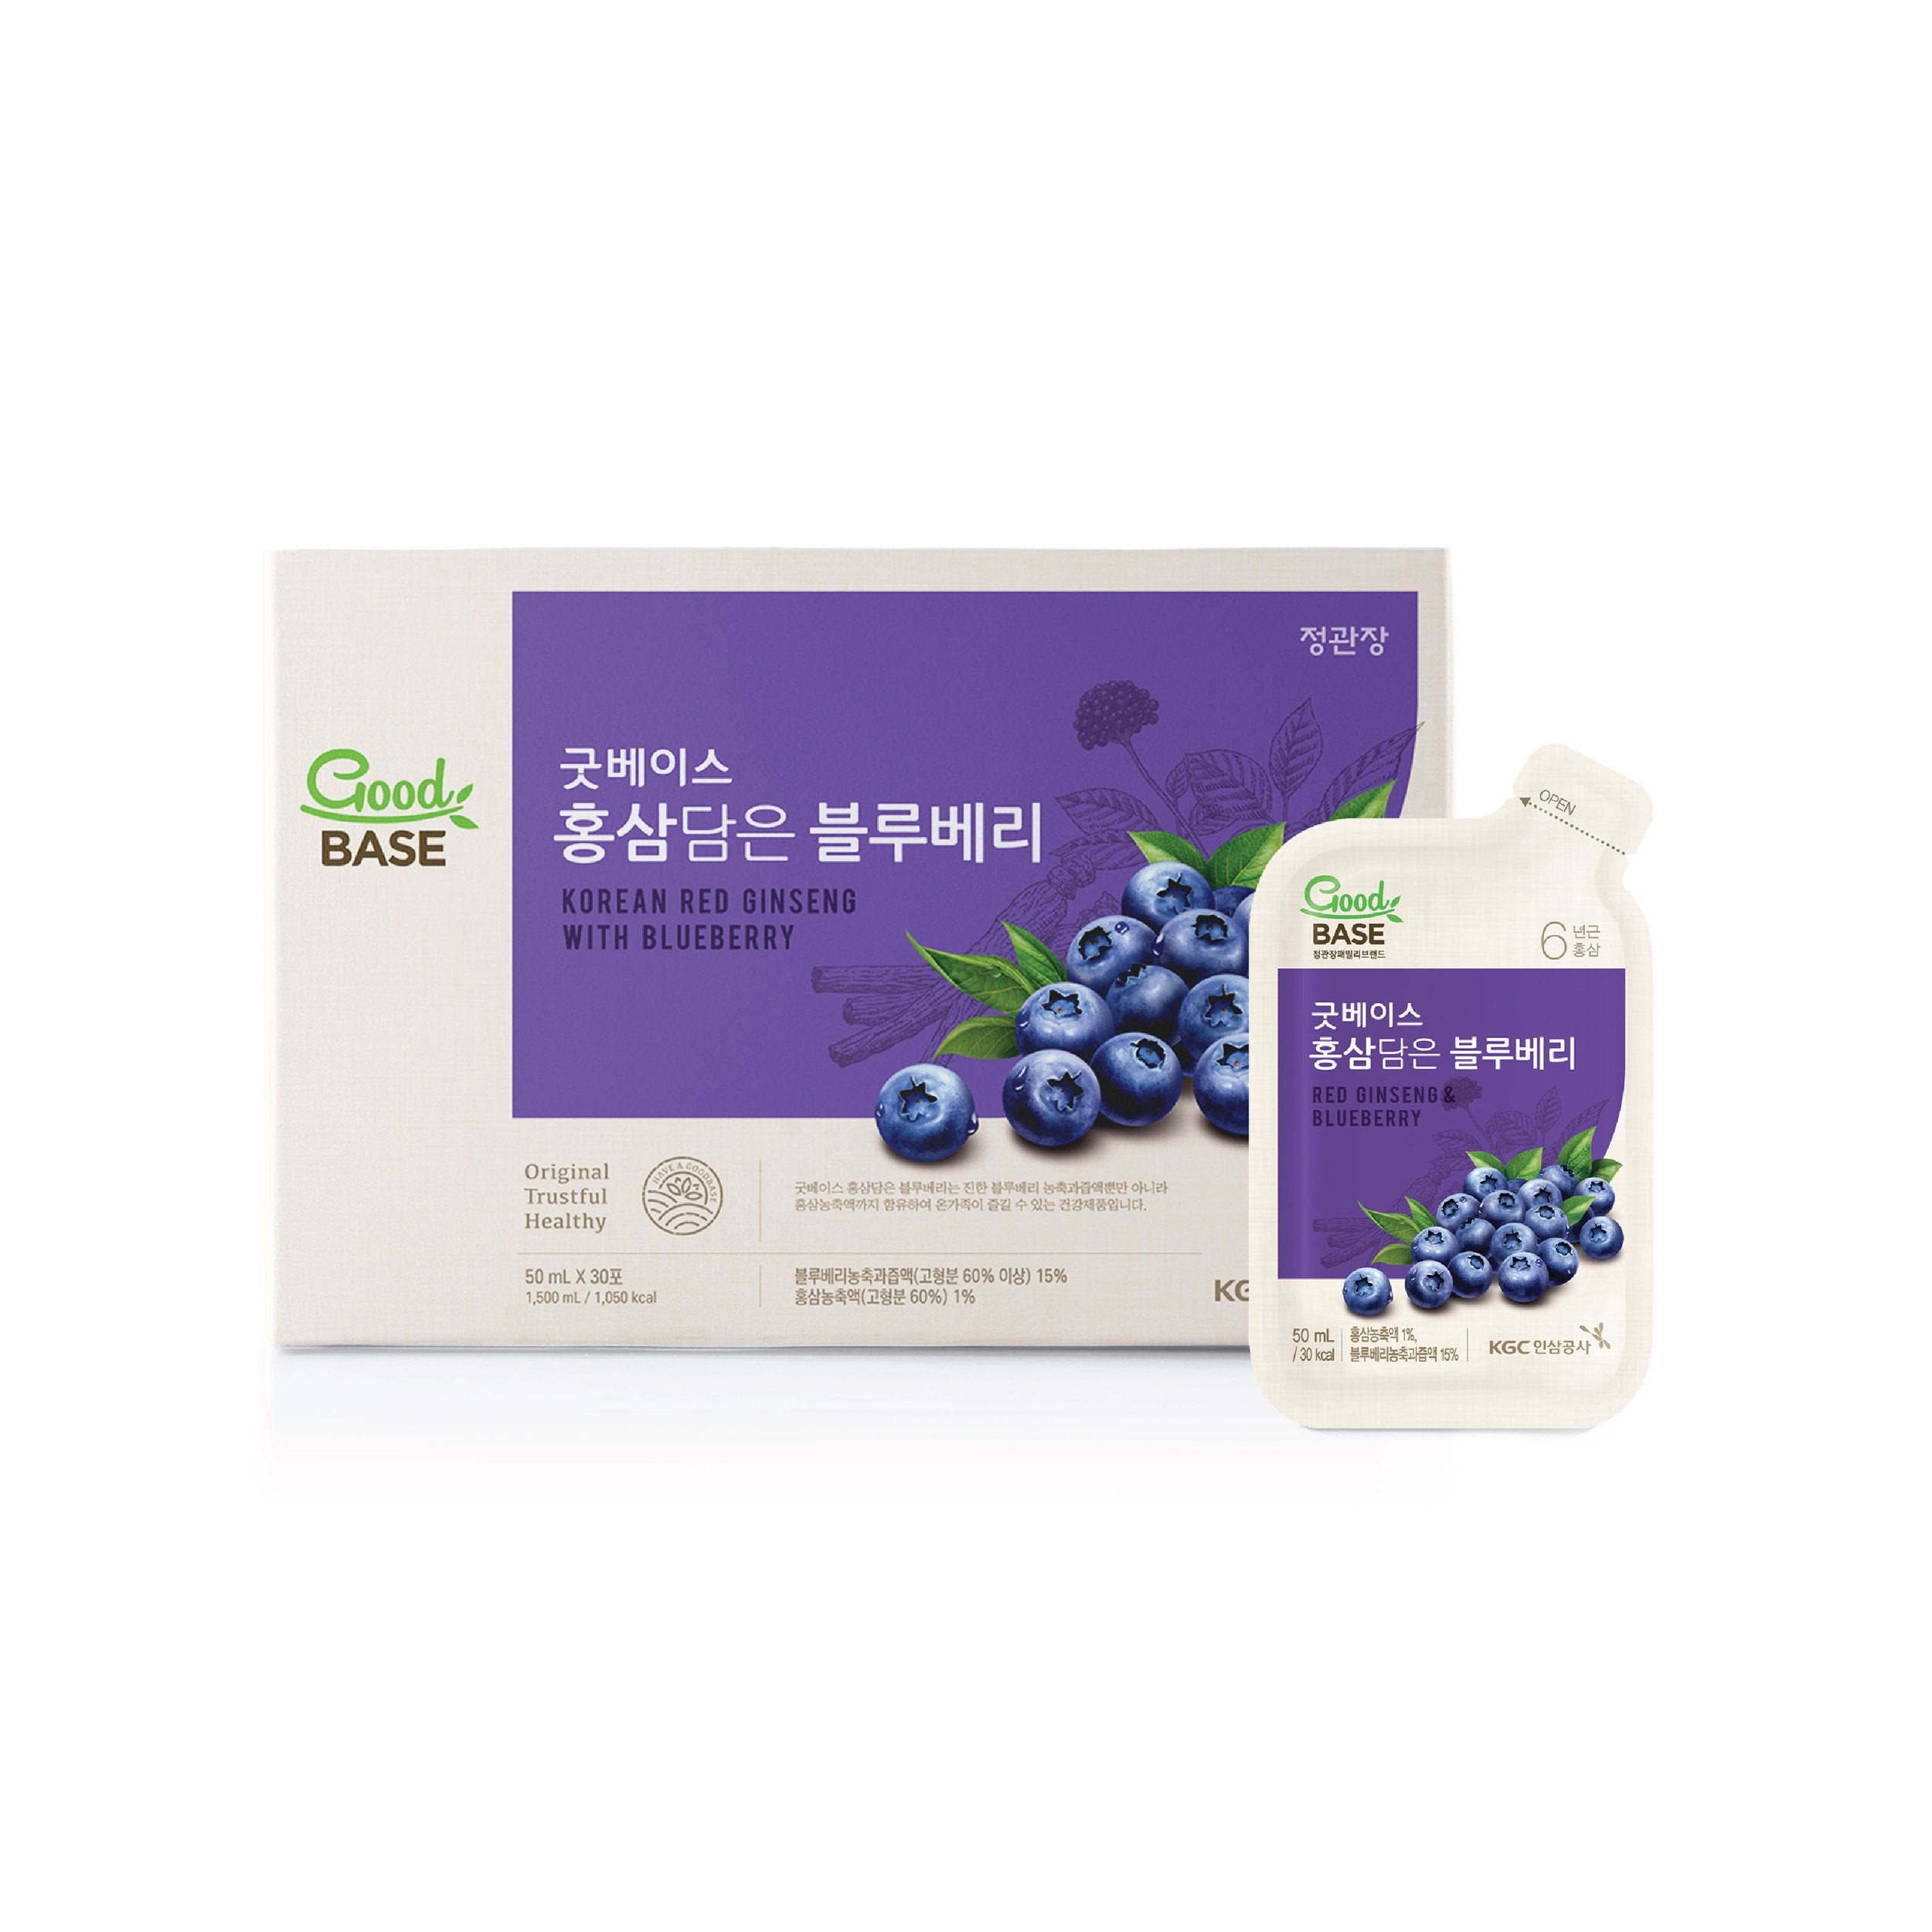 Good Base Red Ginseng & Blueberry - A Powerful Blend